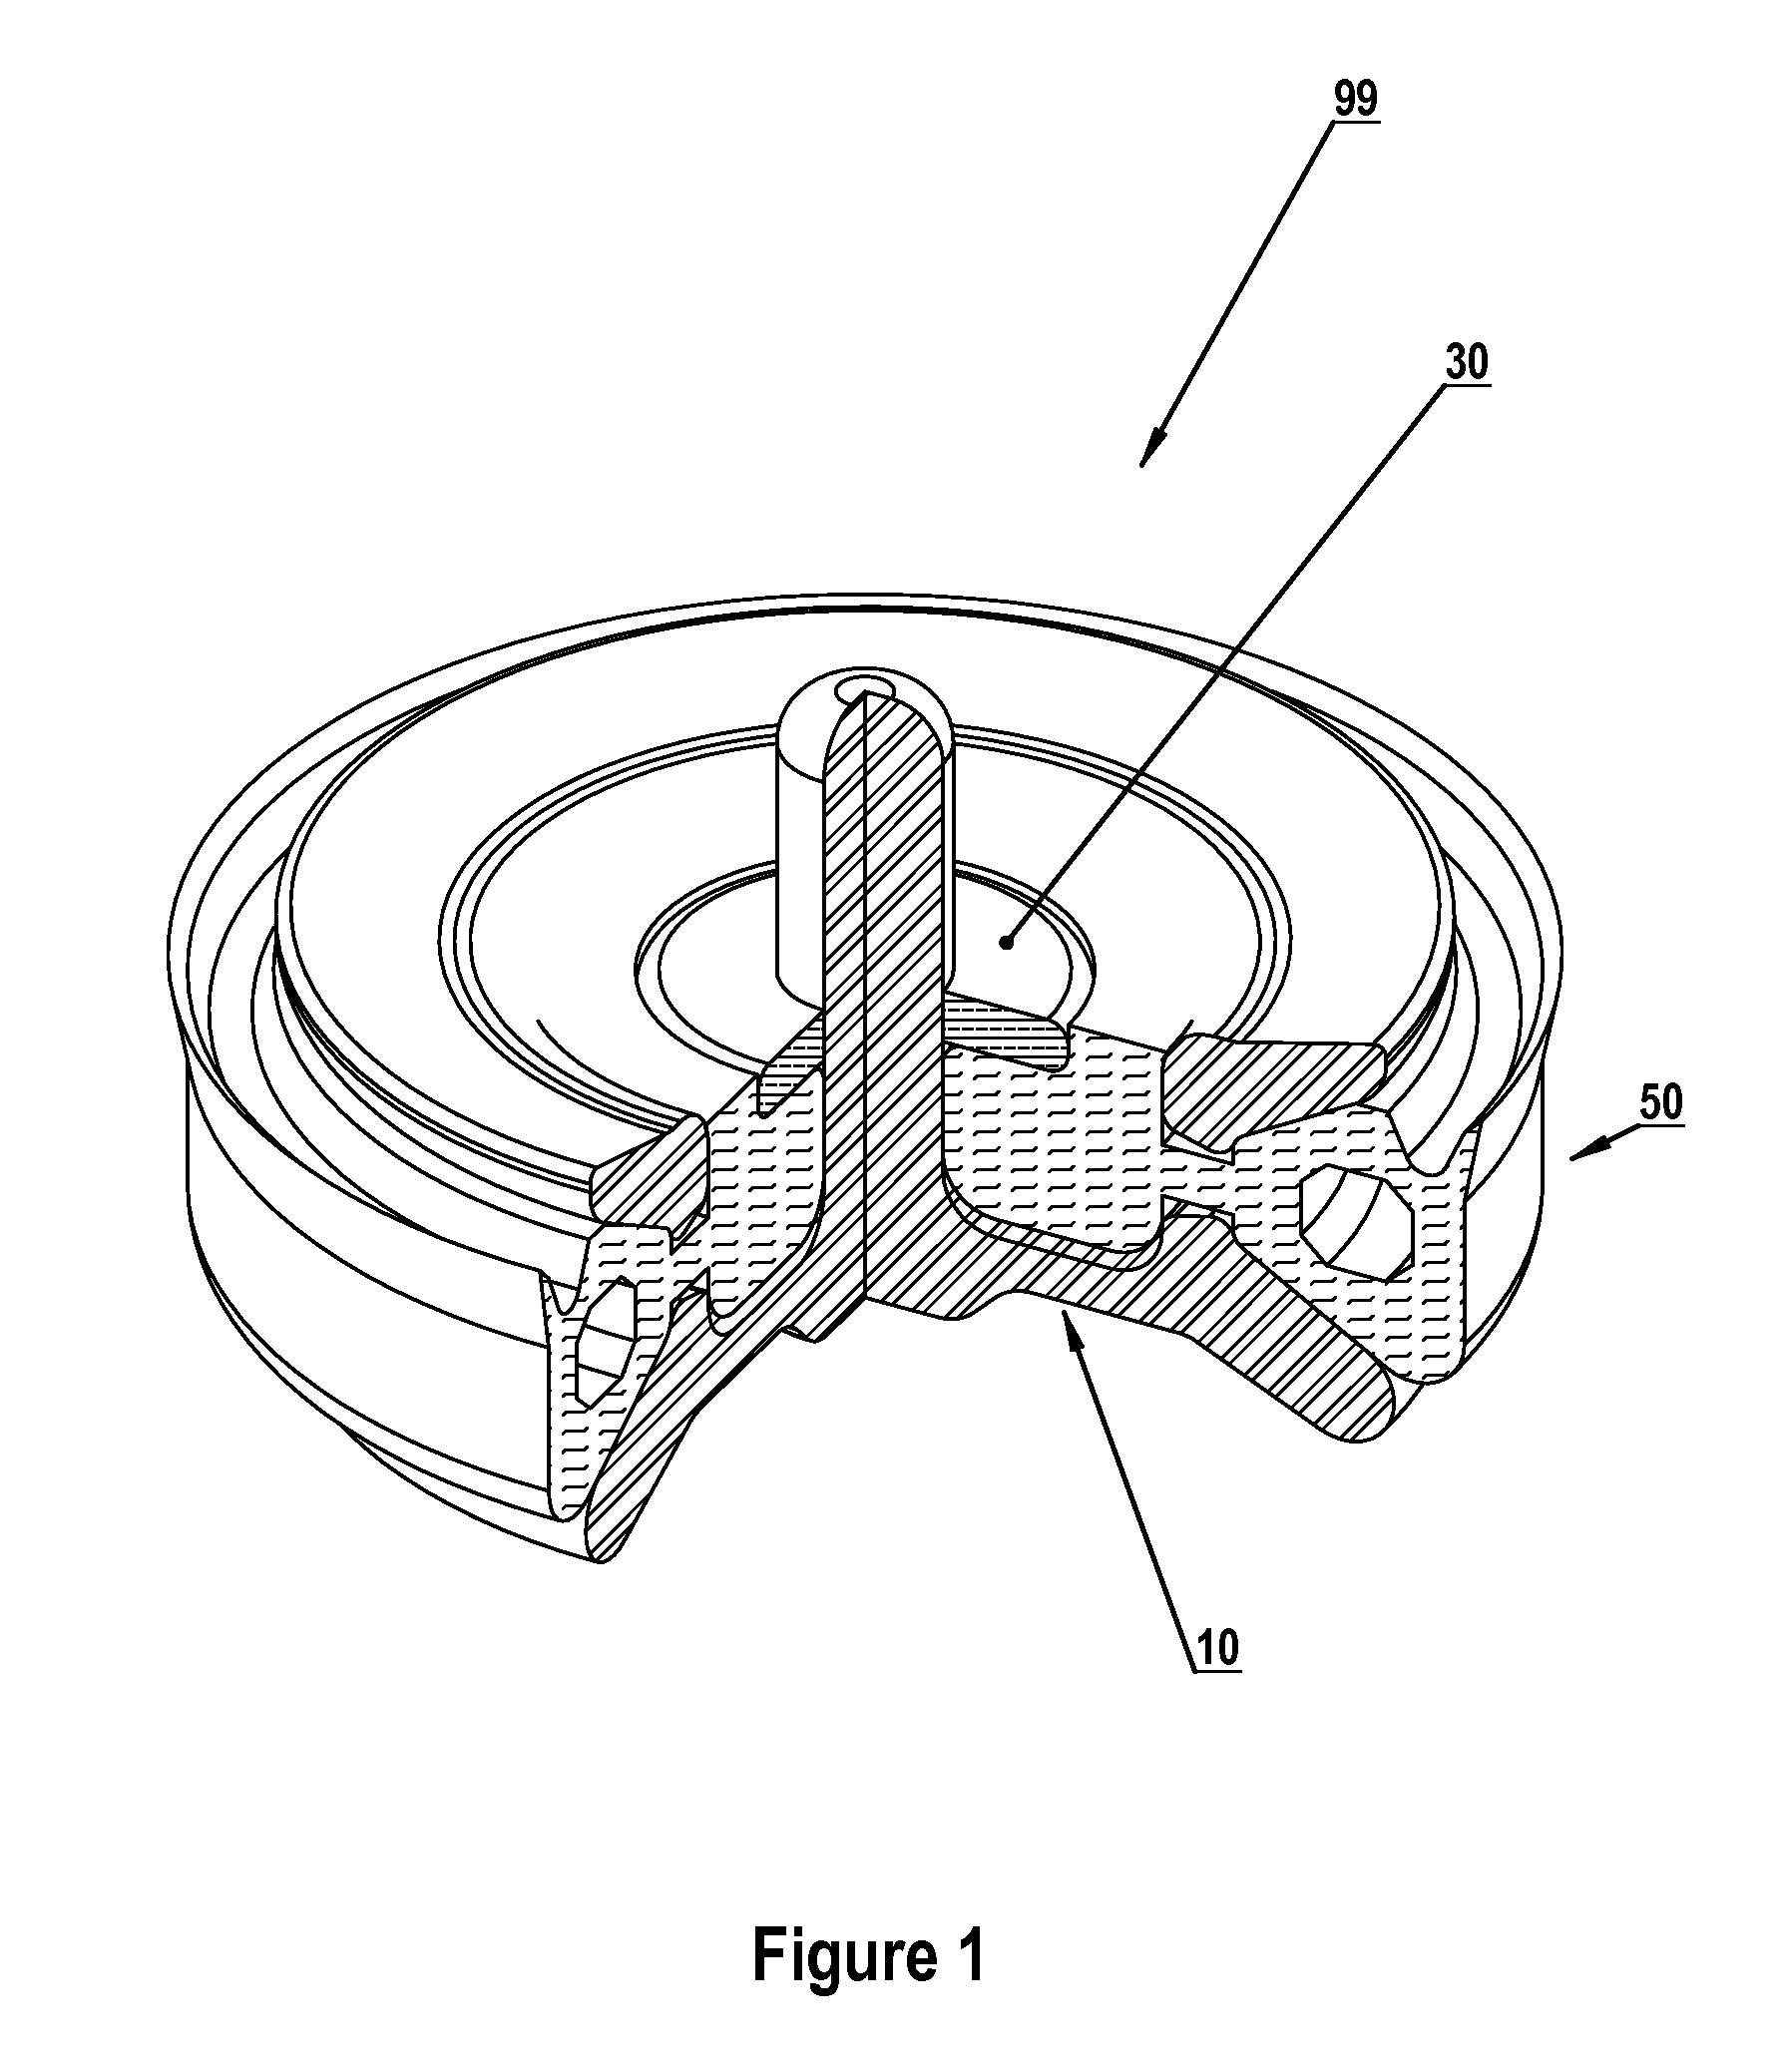 Tunable Down-Hole Stimulation System